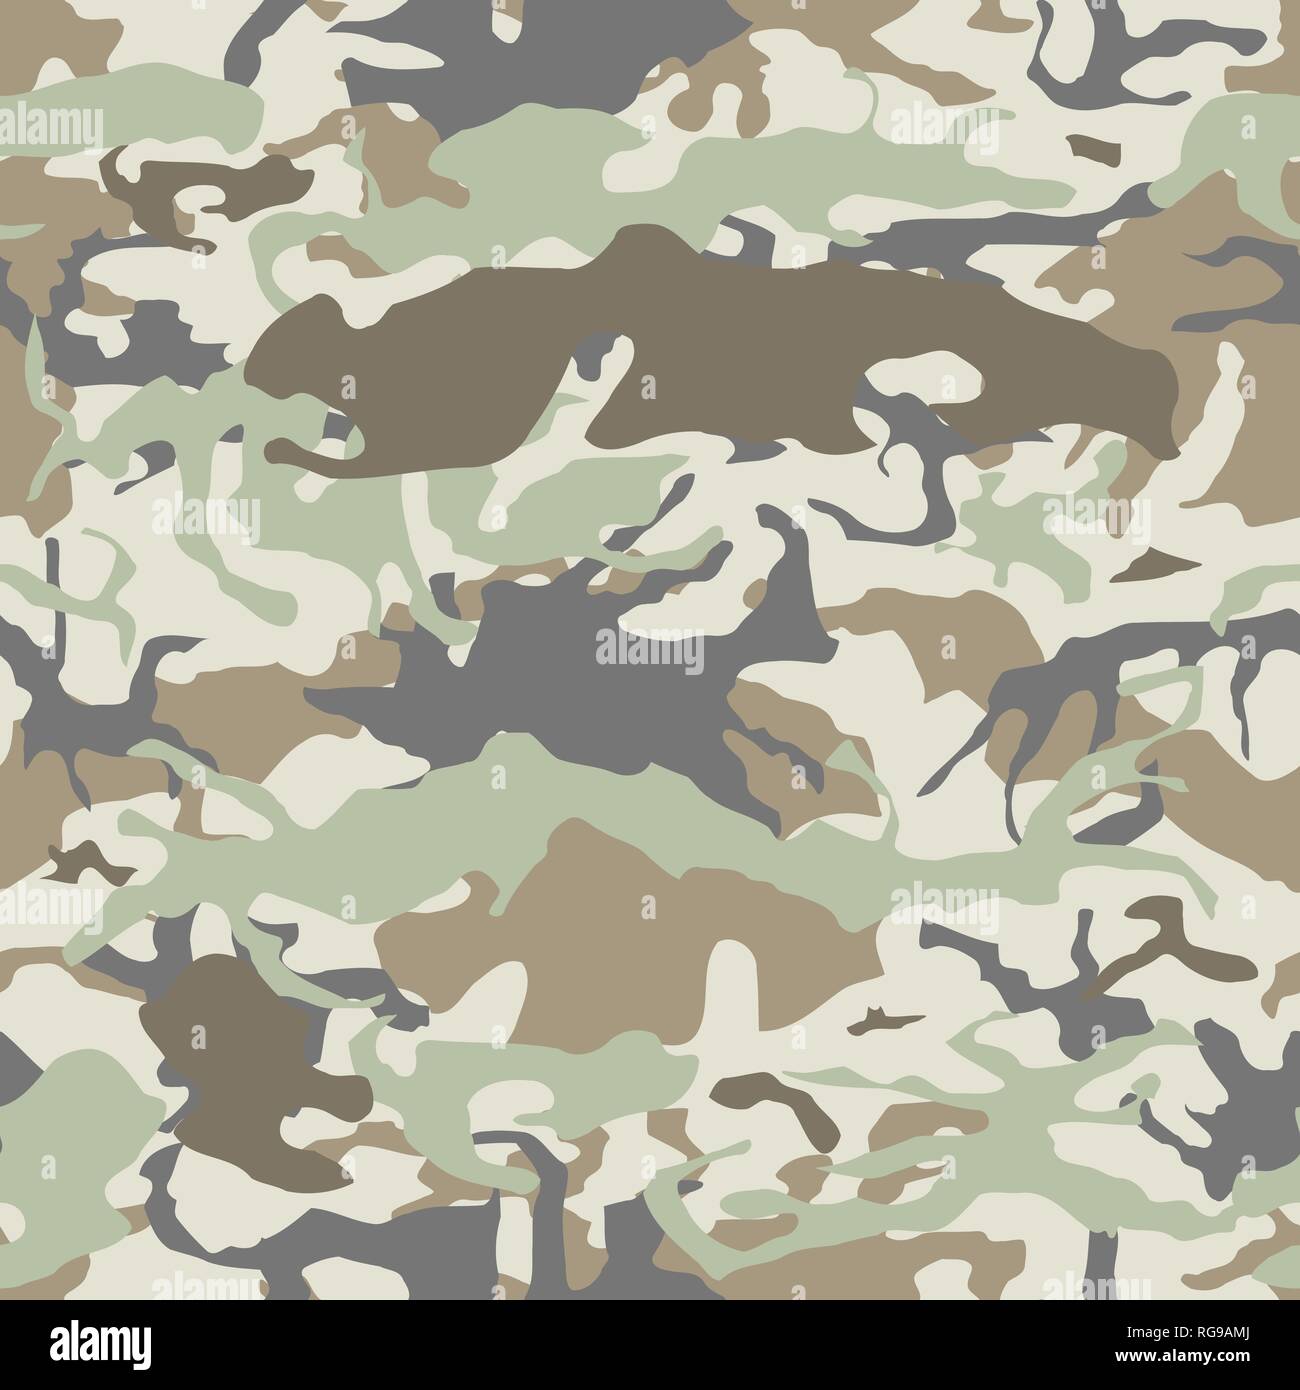 Seamless Army Camouflage Pattern Vector Military Stock, 50% OFF